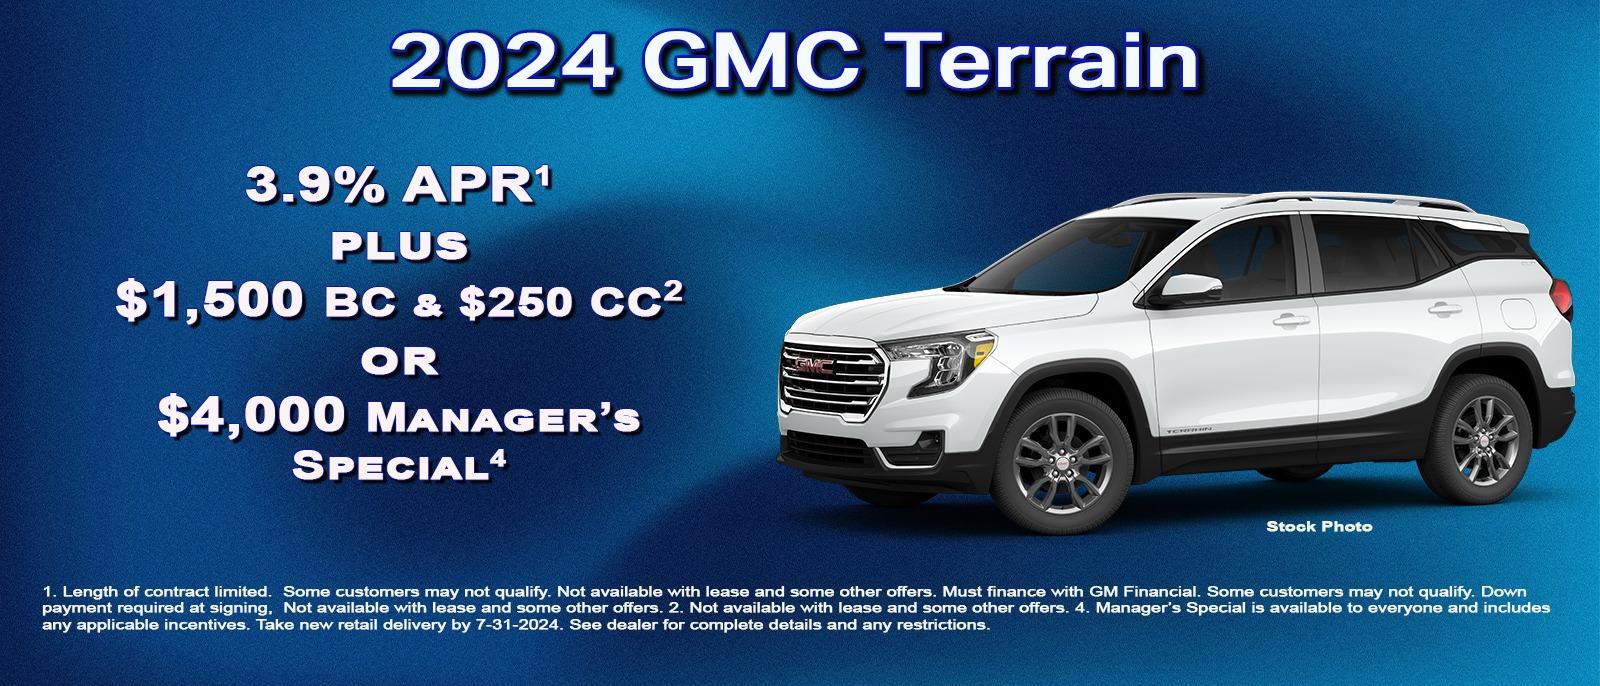 Save $4000 on your new GMC Terrain